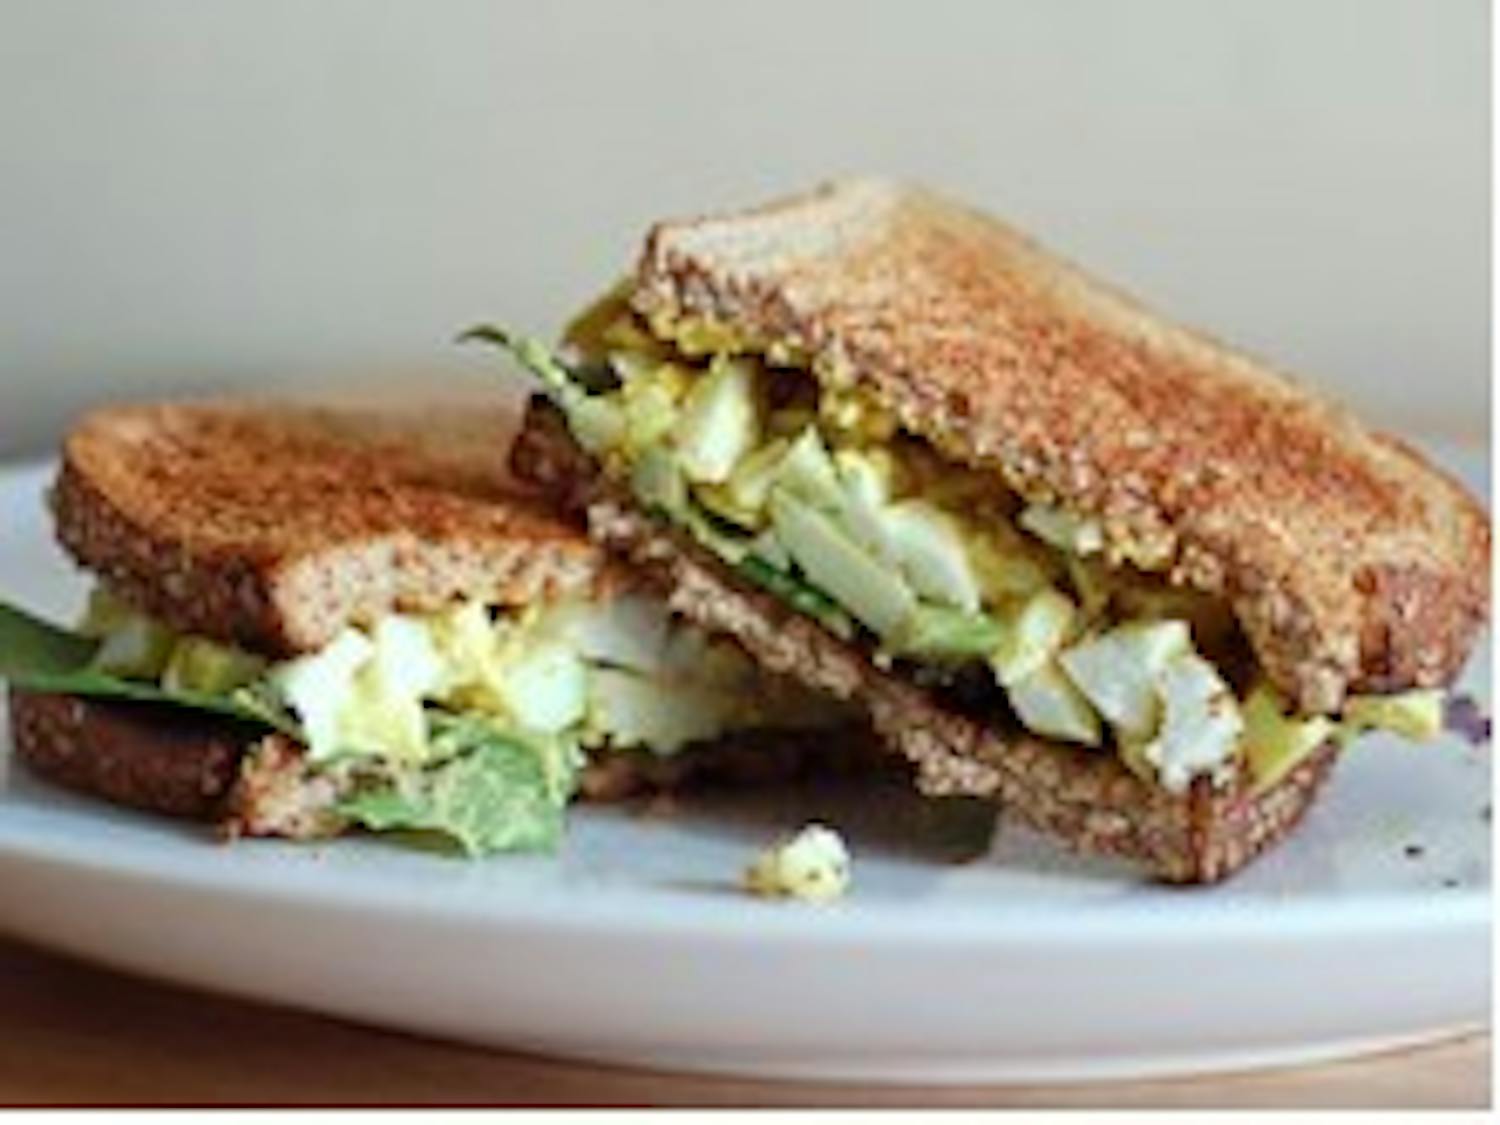 An eggstra-delicious sandwich is calling your name! Photo courtesy of thepioneerwoman.com.